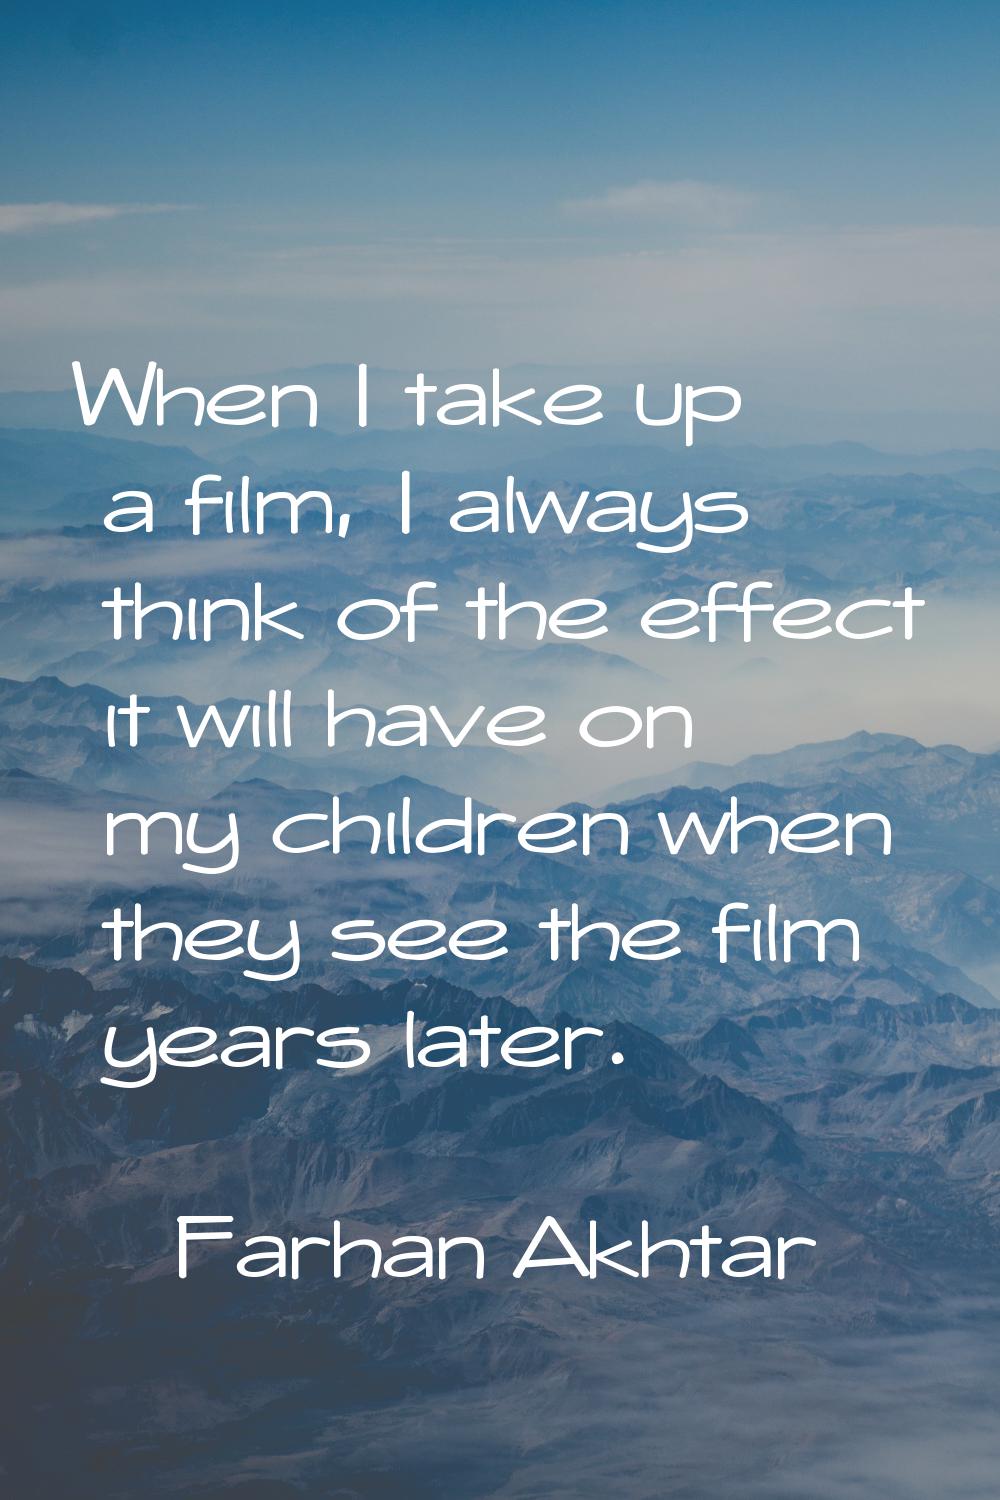 When I take up a film, I always think of the effect it will have on my children when they see the f